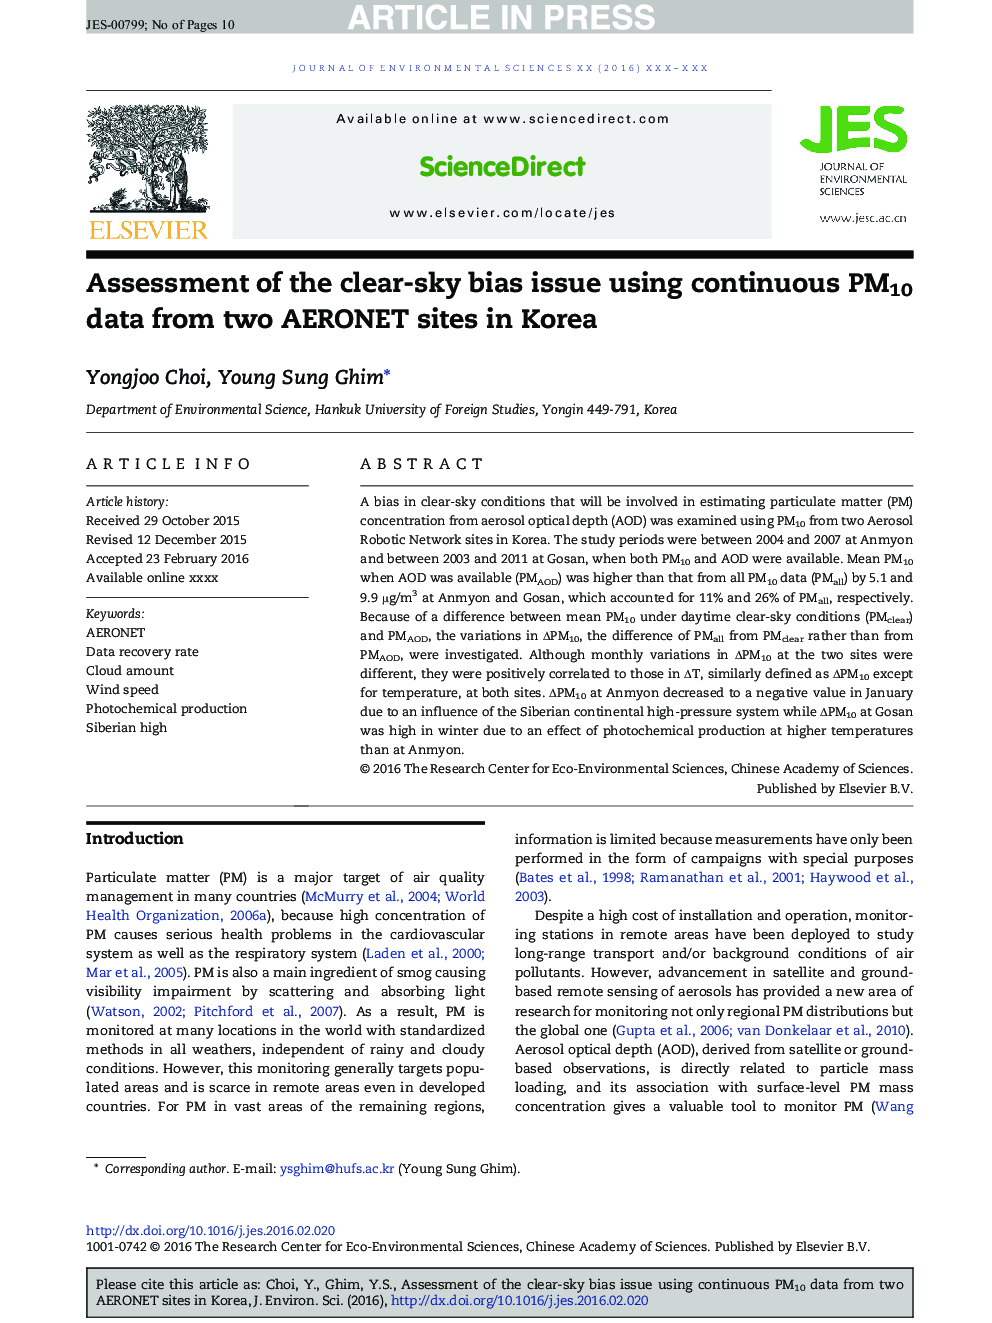 Assessment of the clear-sky bias issue using continuous PM10 data from two AERONET sites in Korea